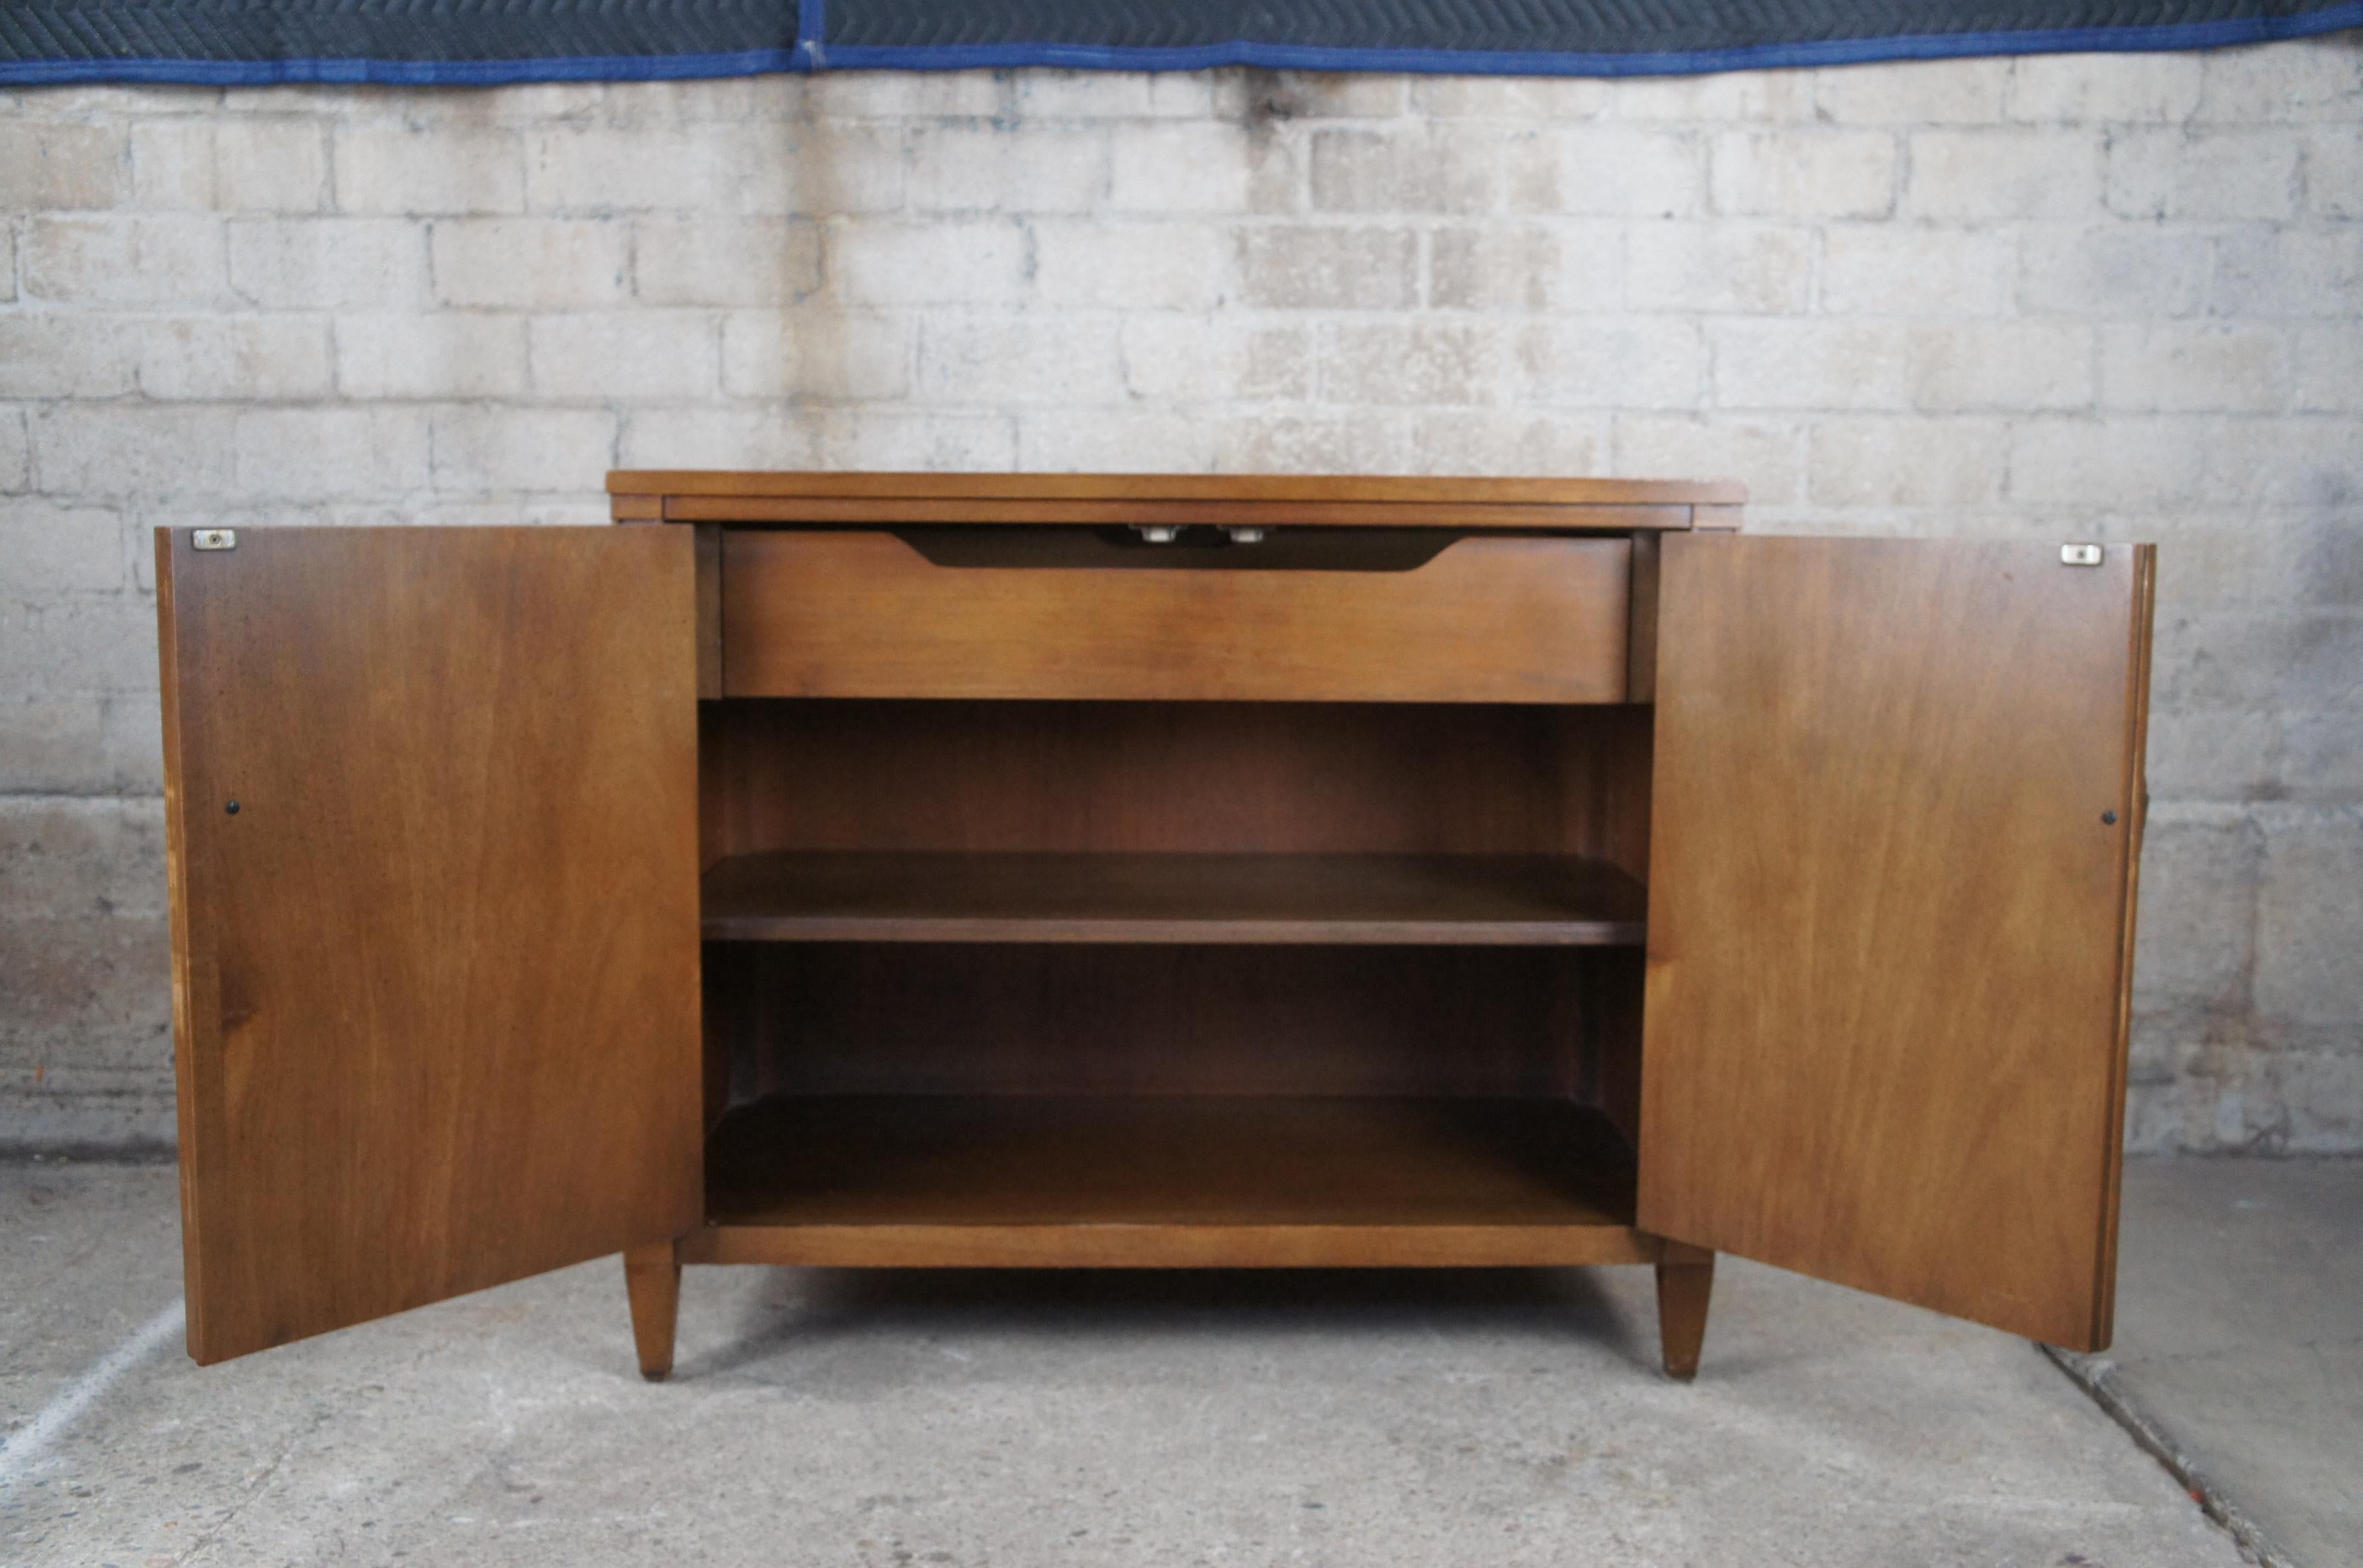 Drexel Triune Mid-Century Modern Mahogany Buffet Server Console Cabinet 585-407 In Good Condition For Sale In Dayton, OH